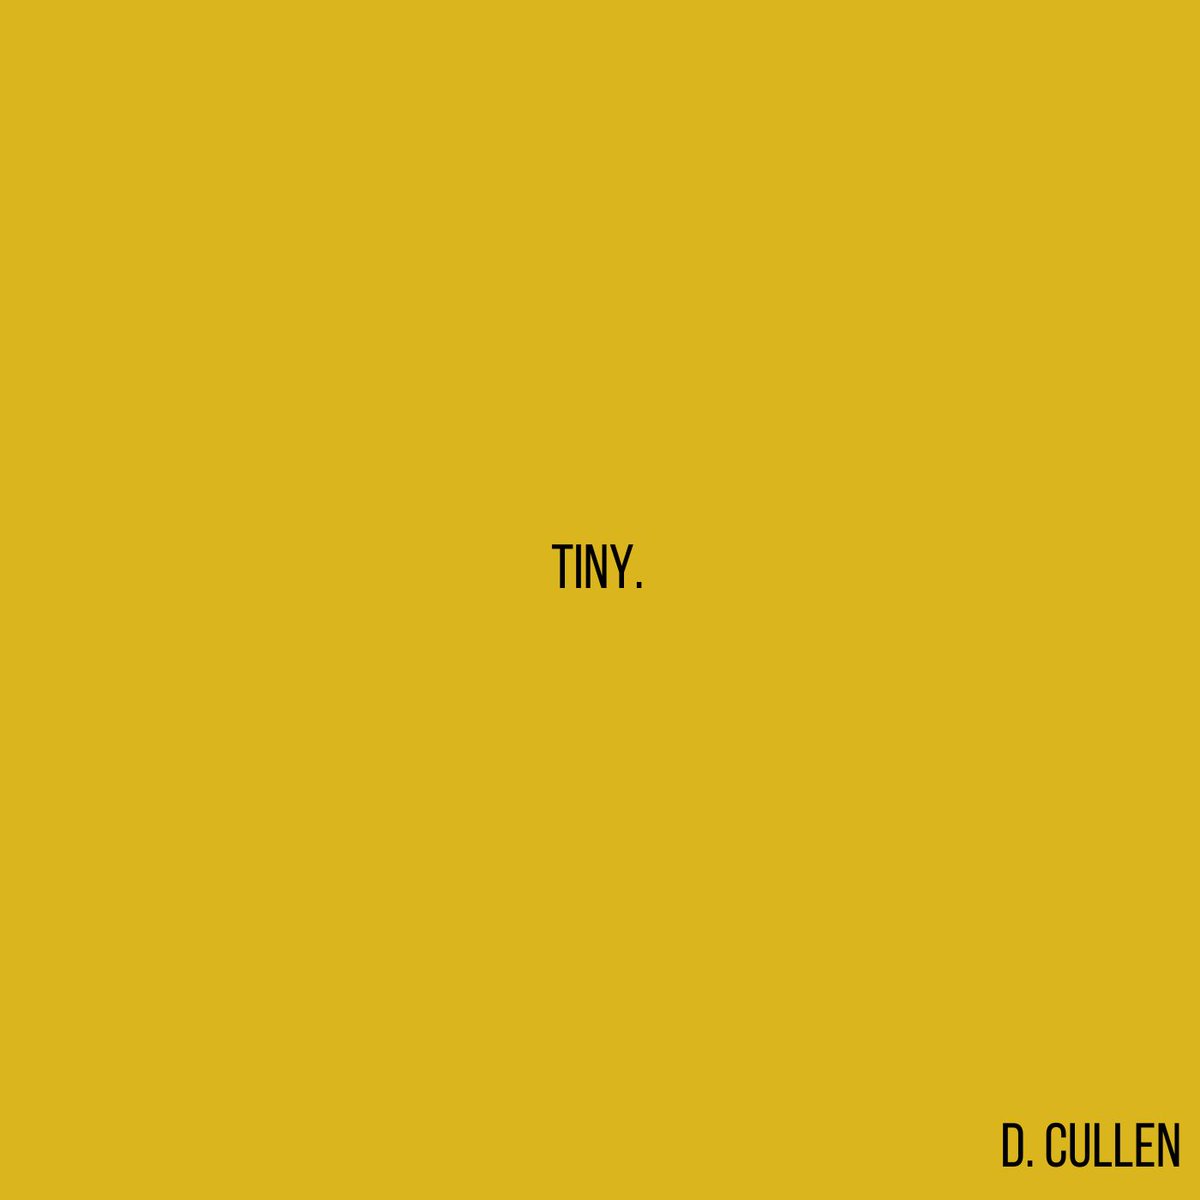 NEW MUSIC ANNOUNCEMENT I am so happy to announce that my new EP, 'Tiny', is out on September 22nd, and is available for Pre-Order now! We have Limited Edition CD's available on my website now (100 copies only!), so pre-order now and get 'em before they go! dcullenmusic.com/shop